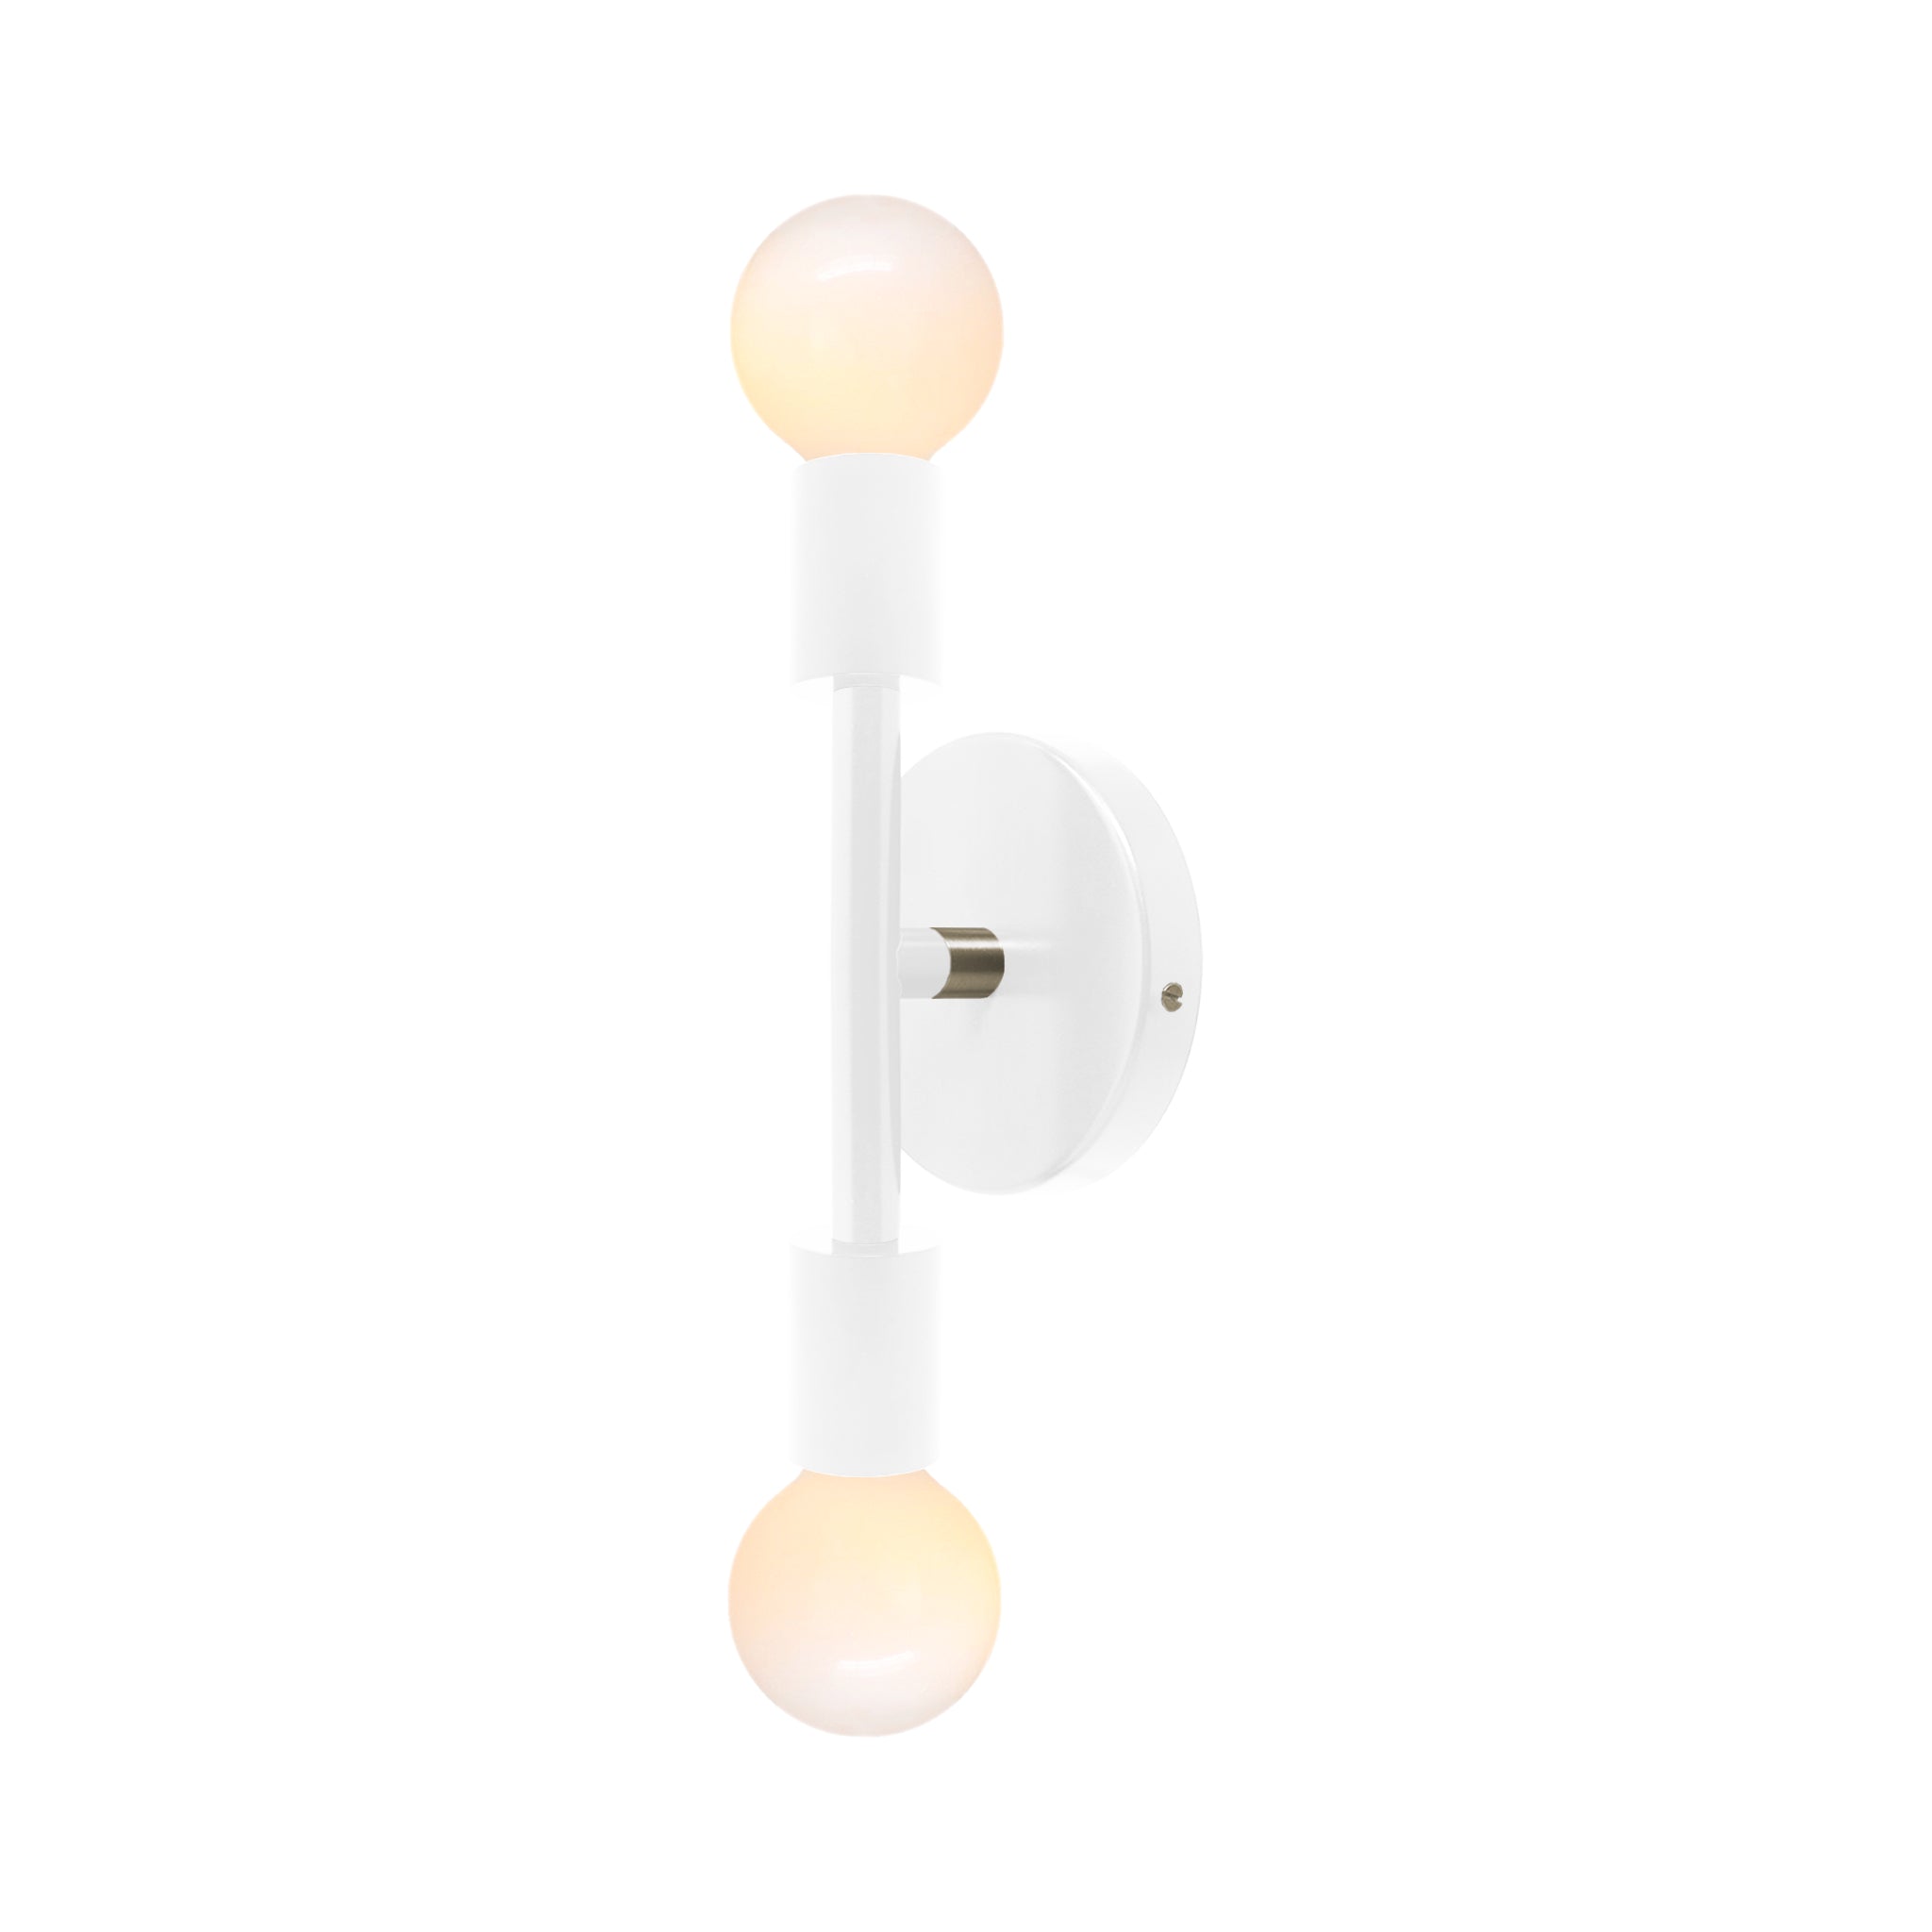 Nickel and white color Pilot sconce 11" Dutton Brown lighting